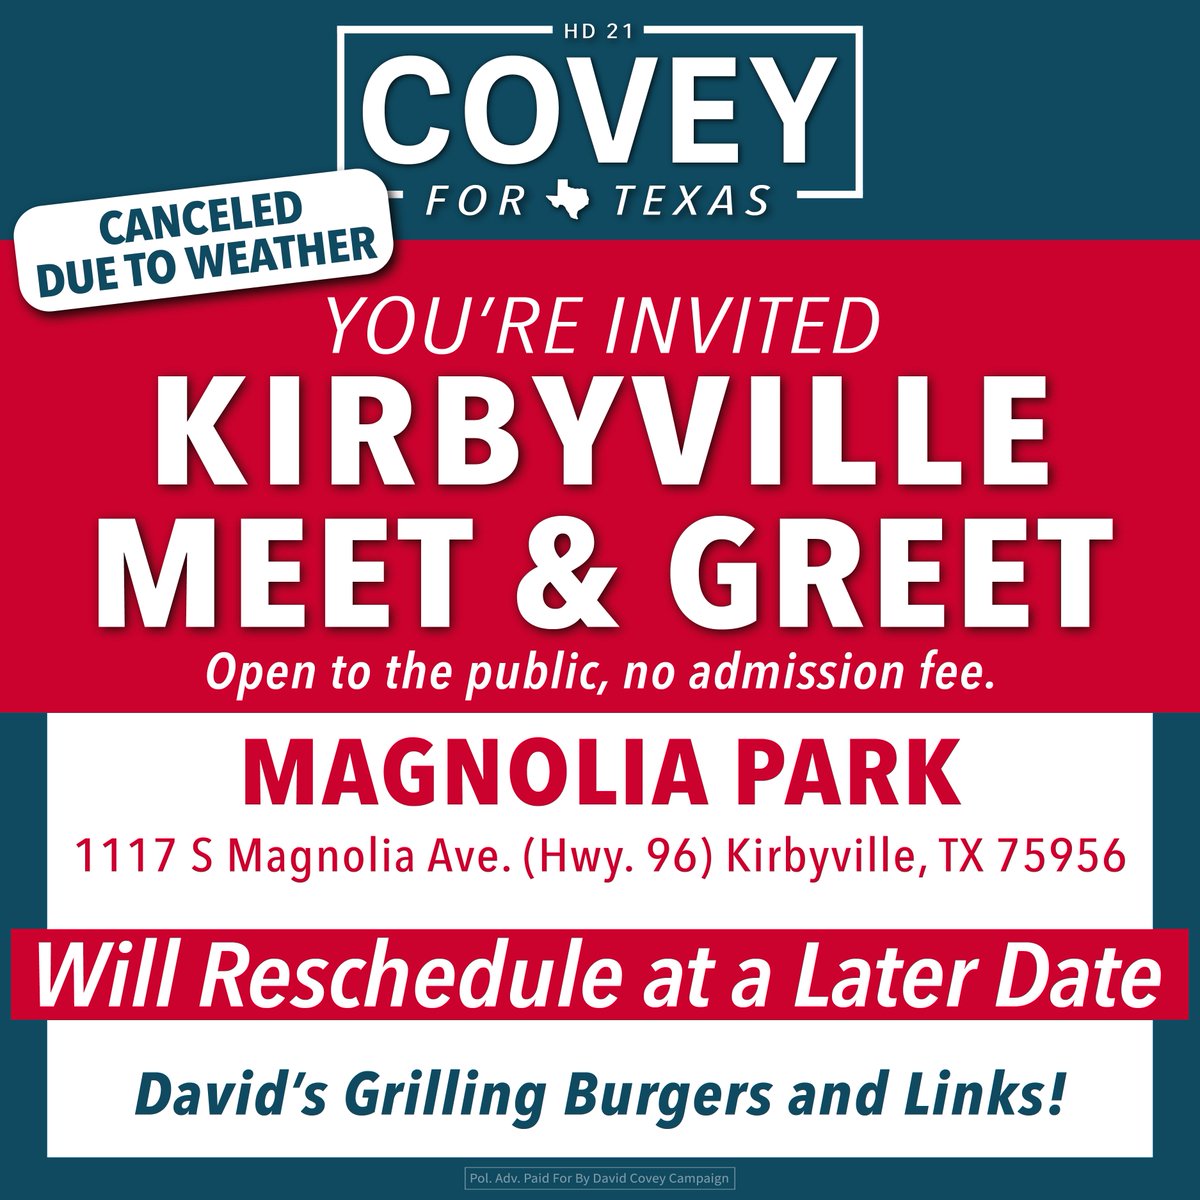 Due to the extreme weather and flooding, the Kirbyville meet and greet today has been cancelled. It will be rescheduled at a later date.